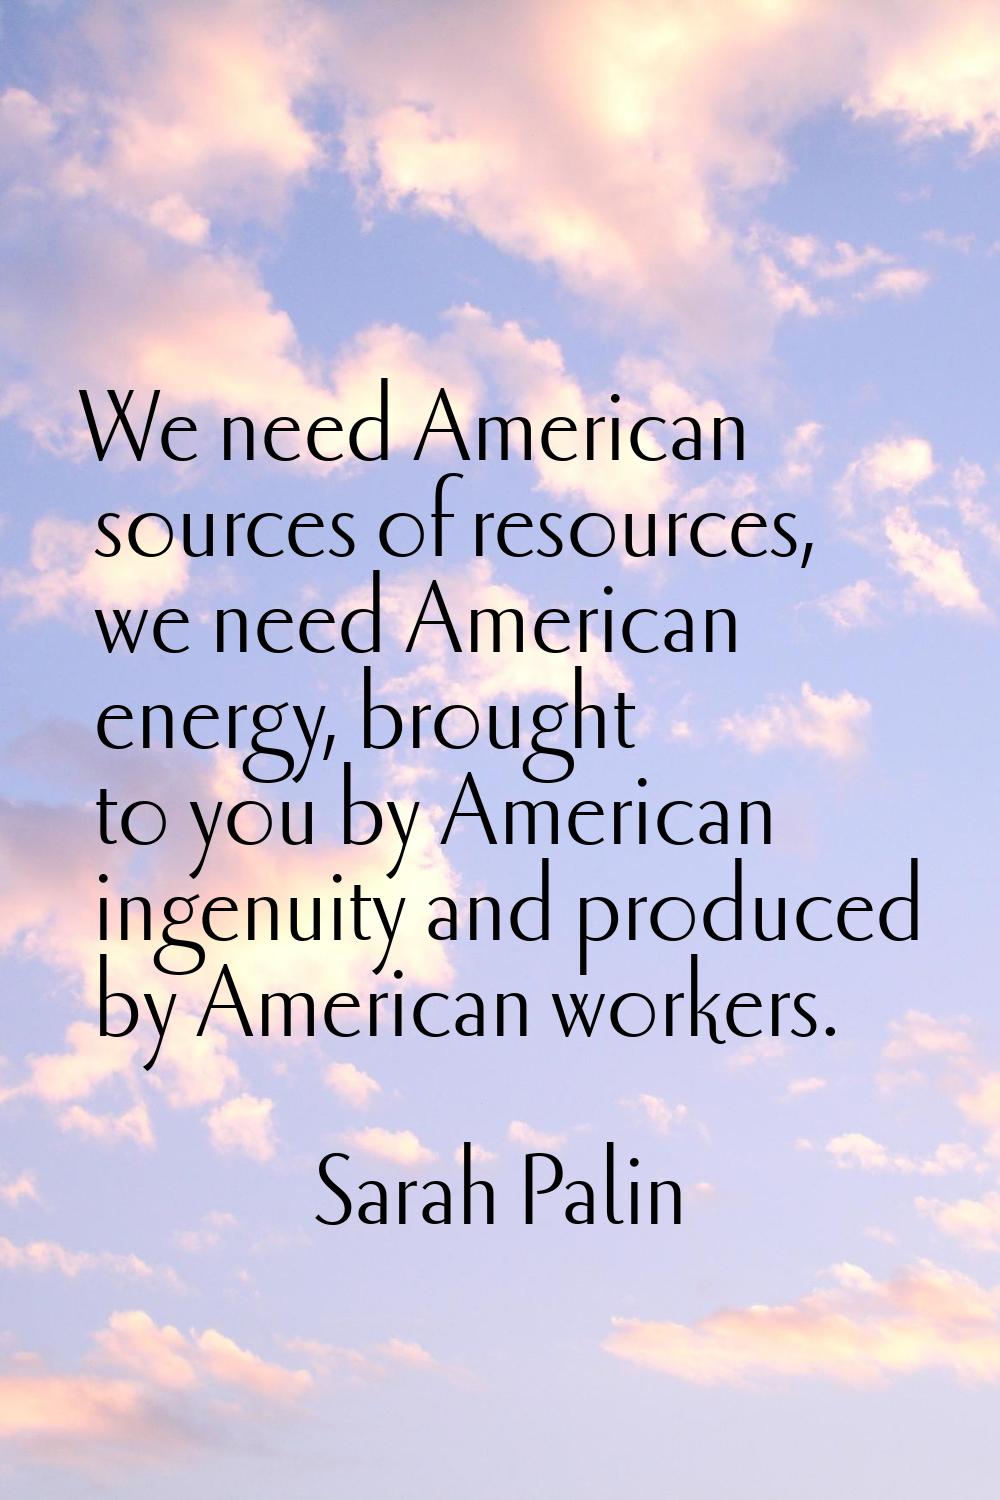 We need American sources of resources, we need American energy, brought to you by American ingenuit